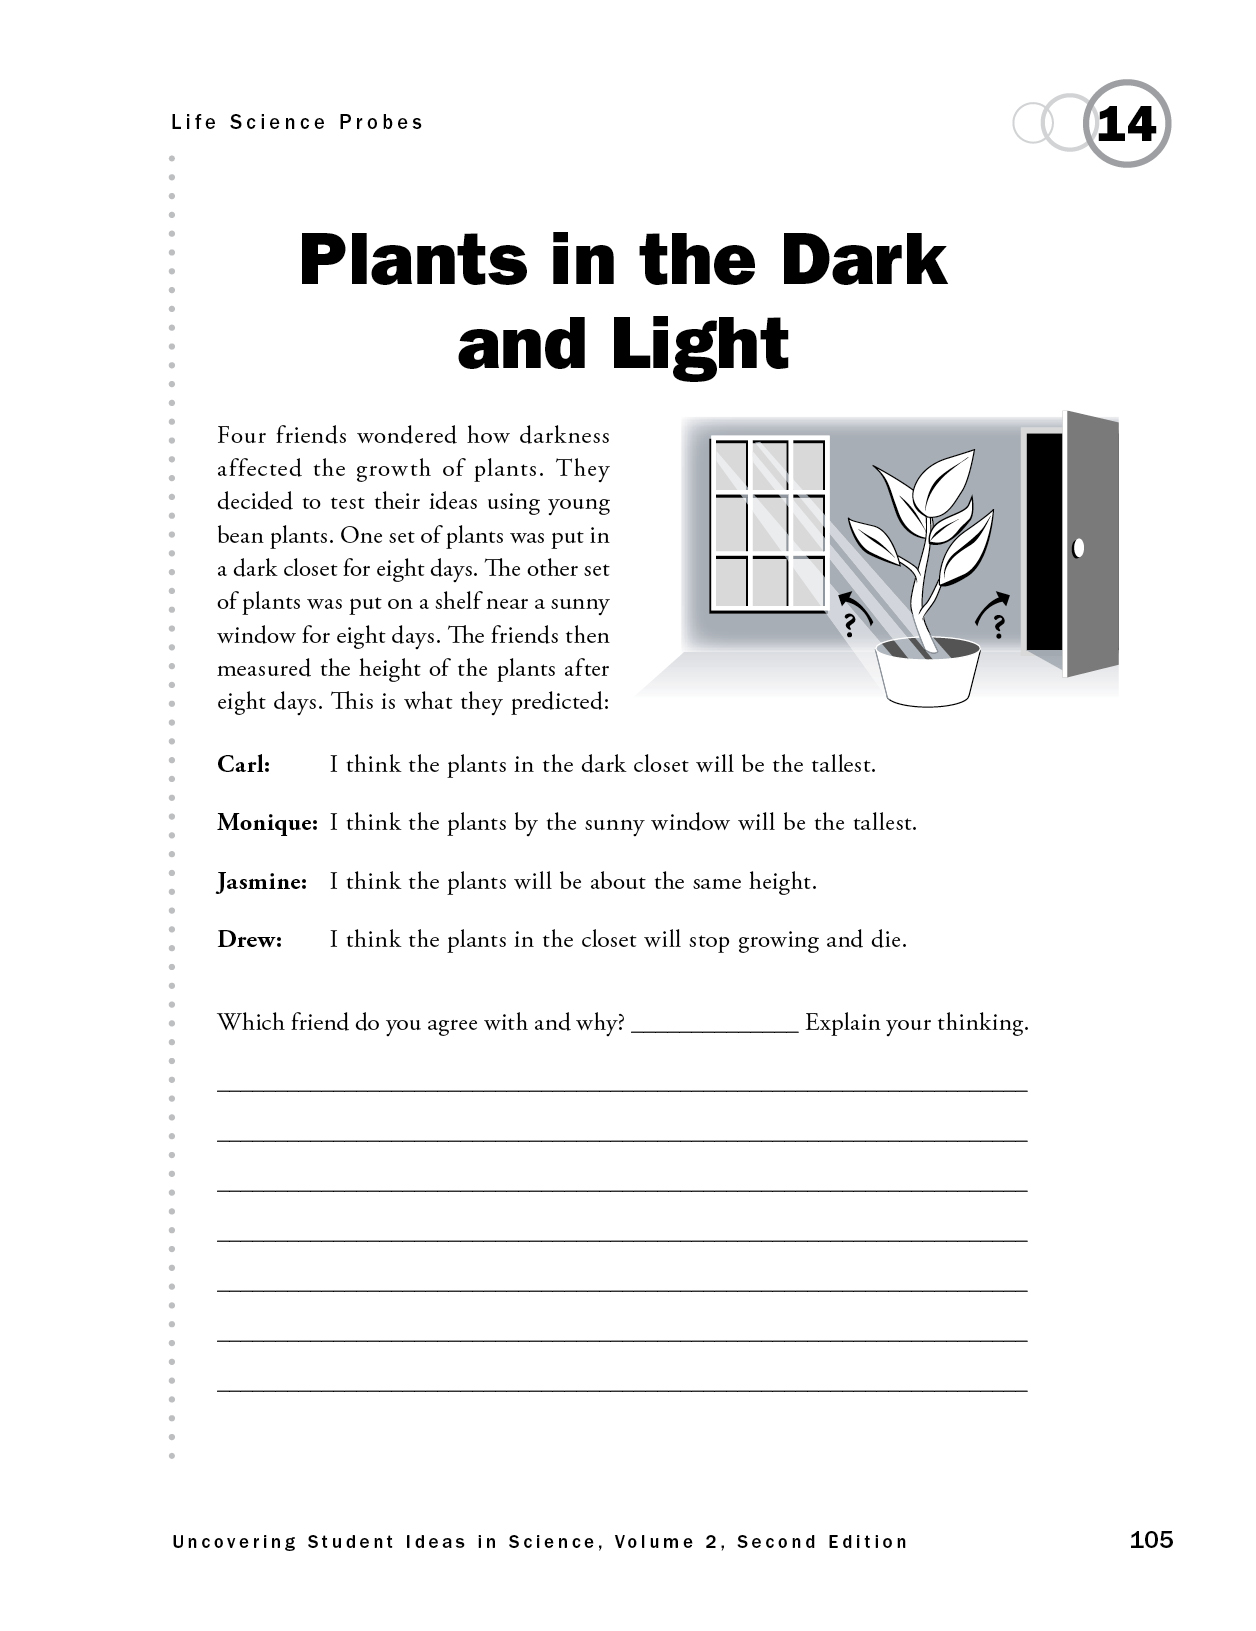 Plants in the Dark and Light